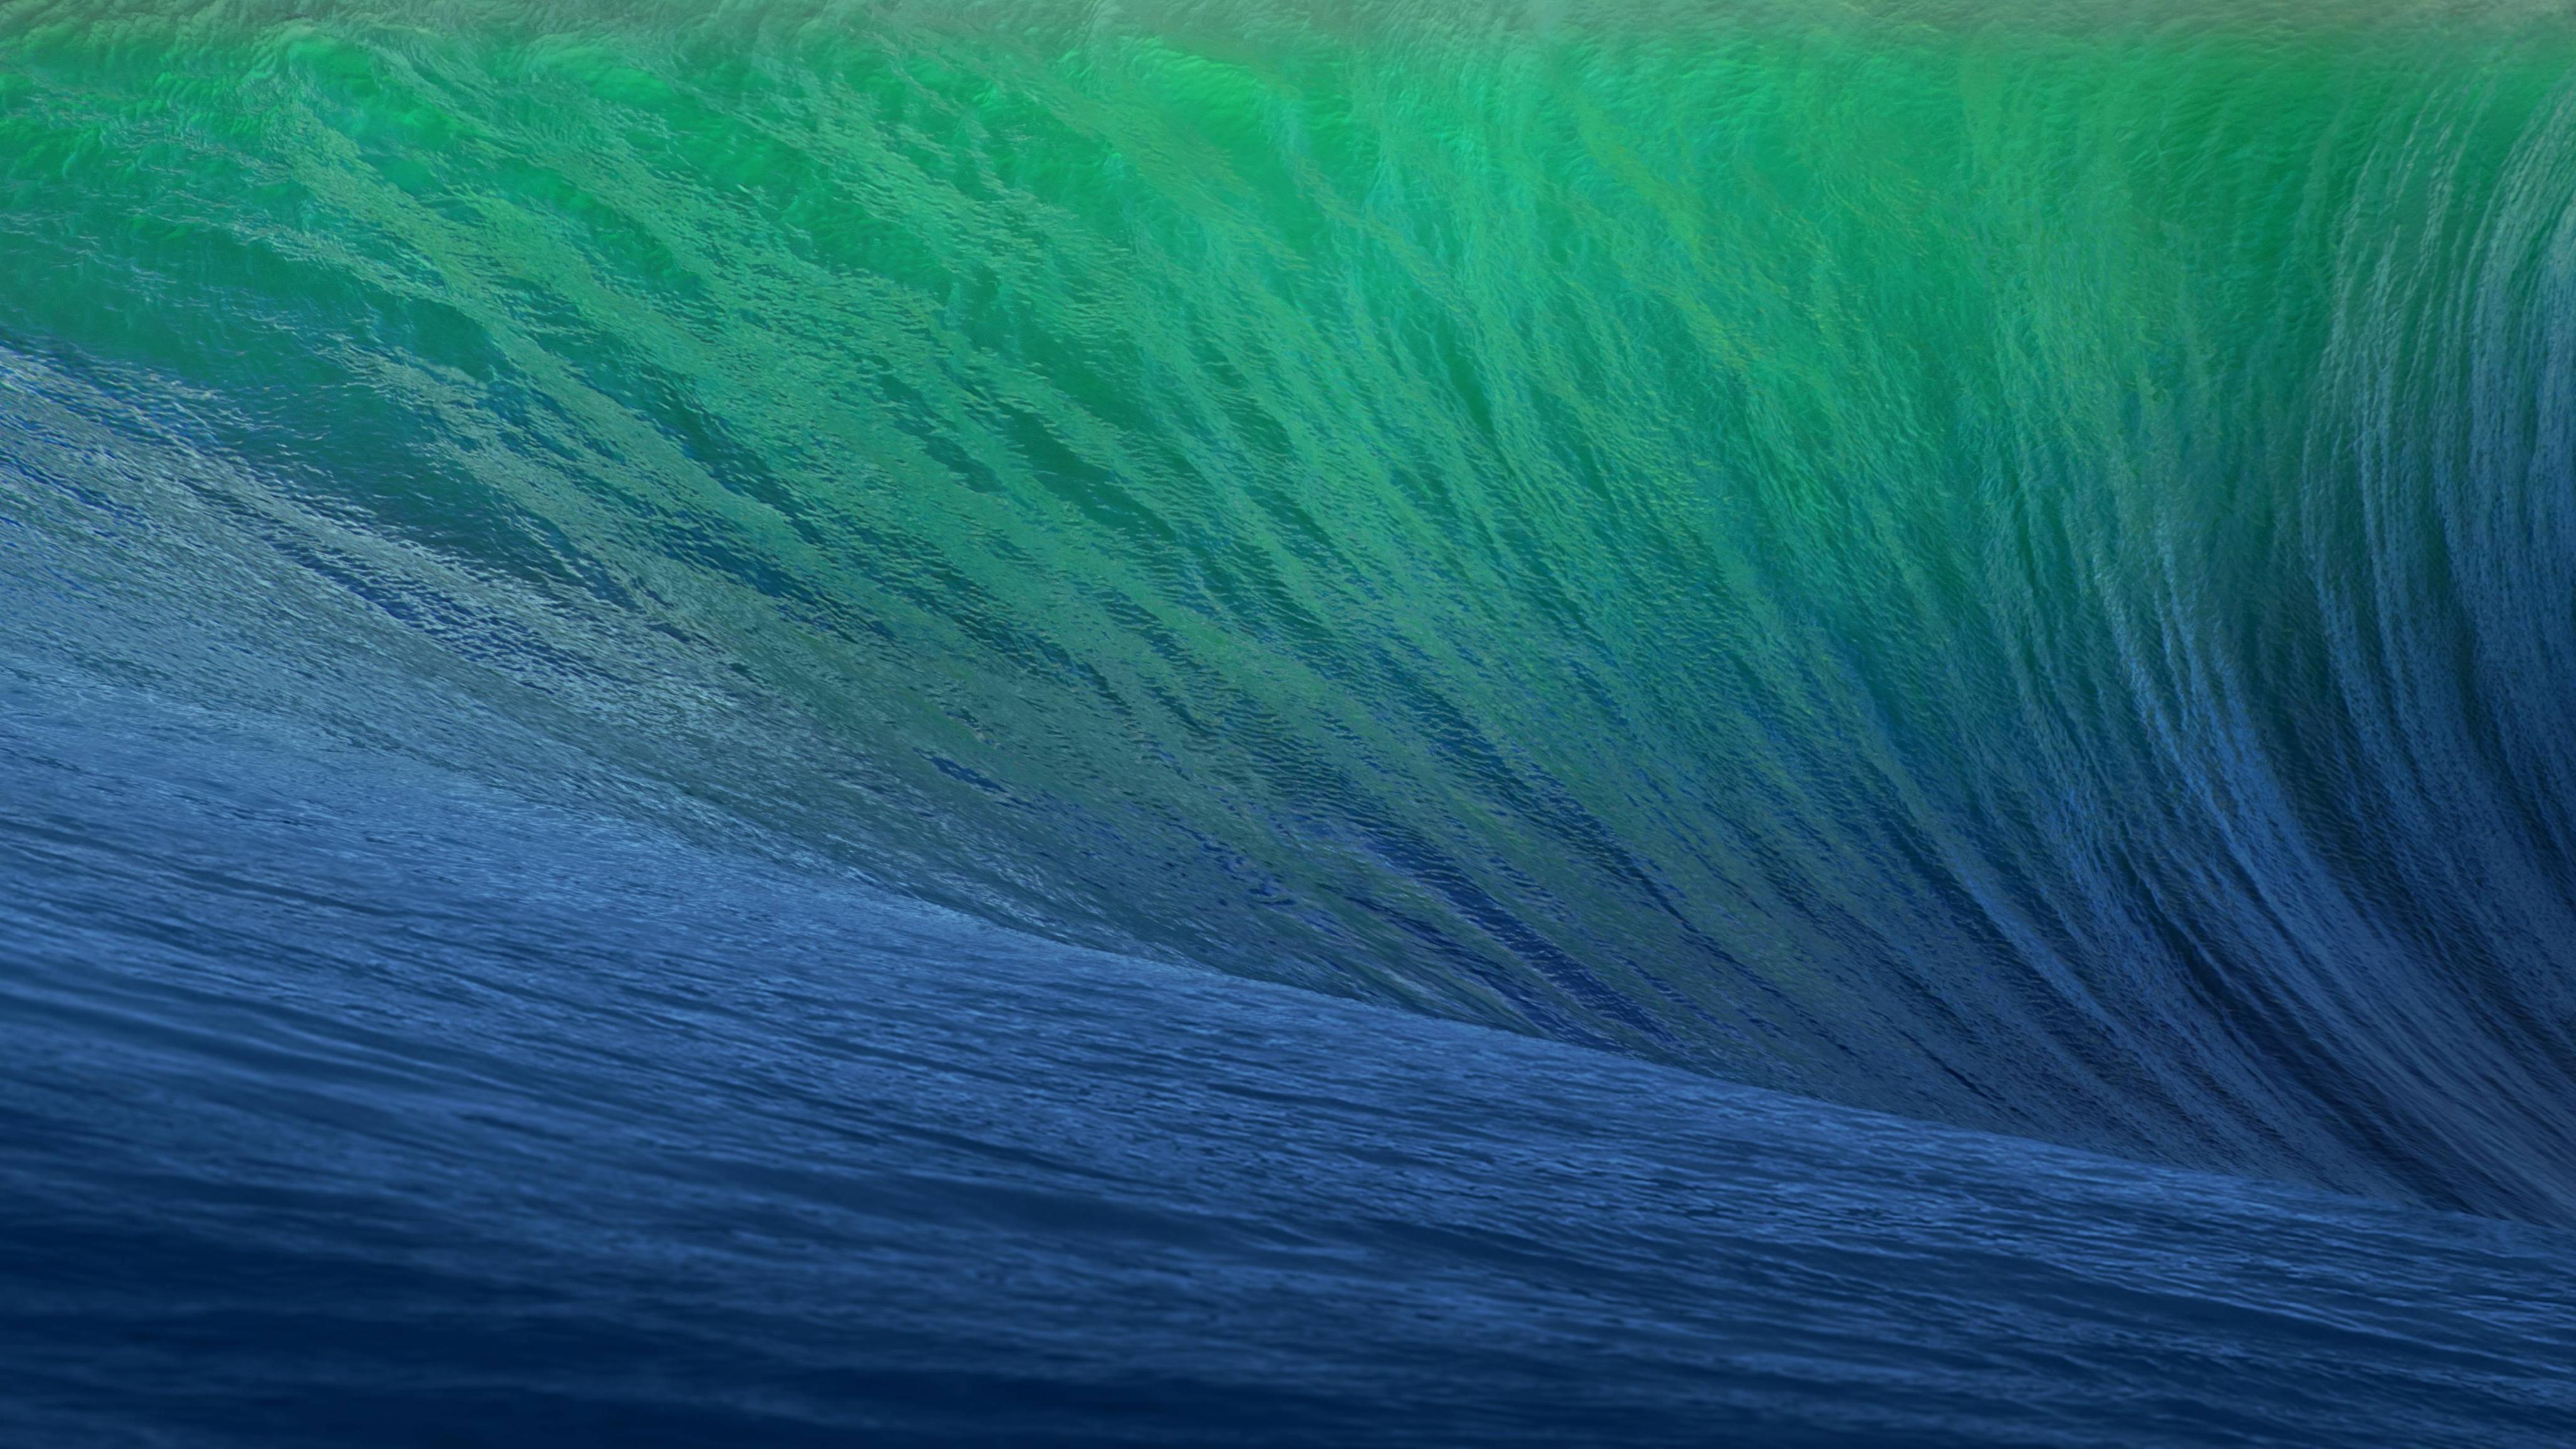 OS X Mavericks Wallpaper for iPhone 5 About Mac. Nuts